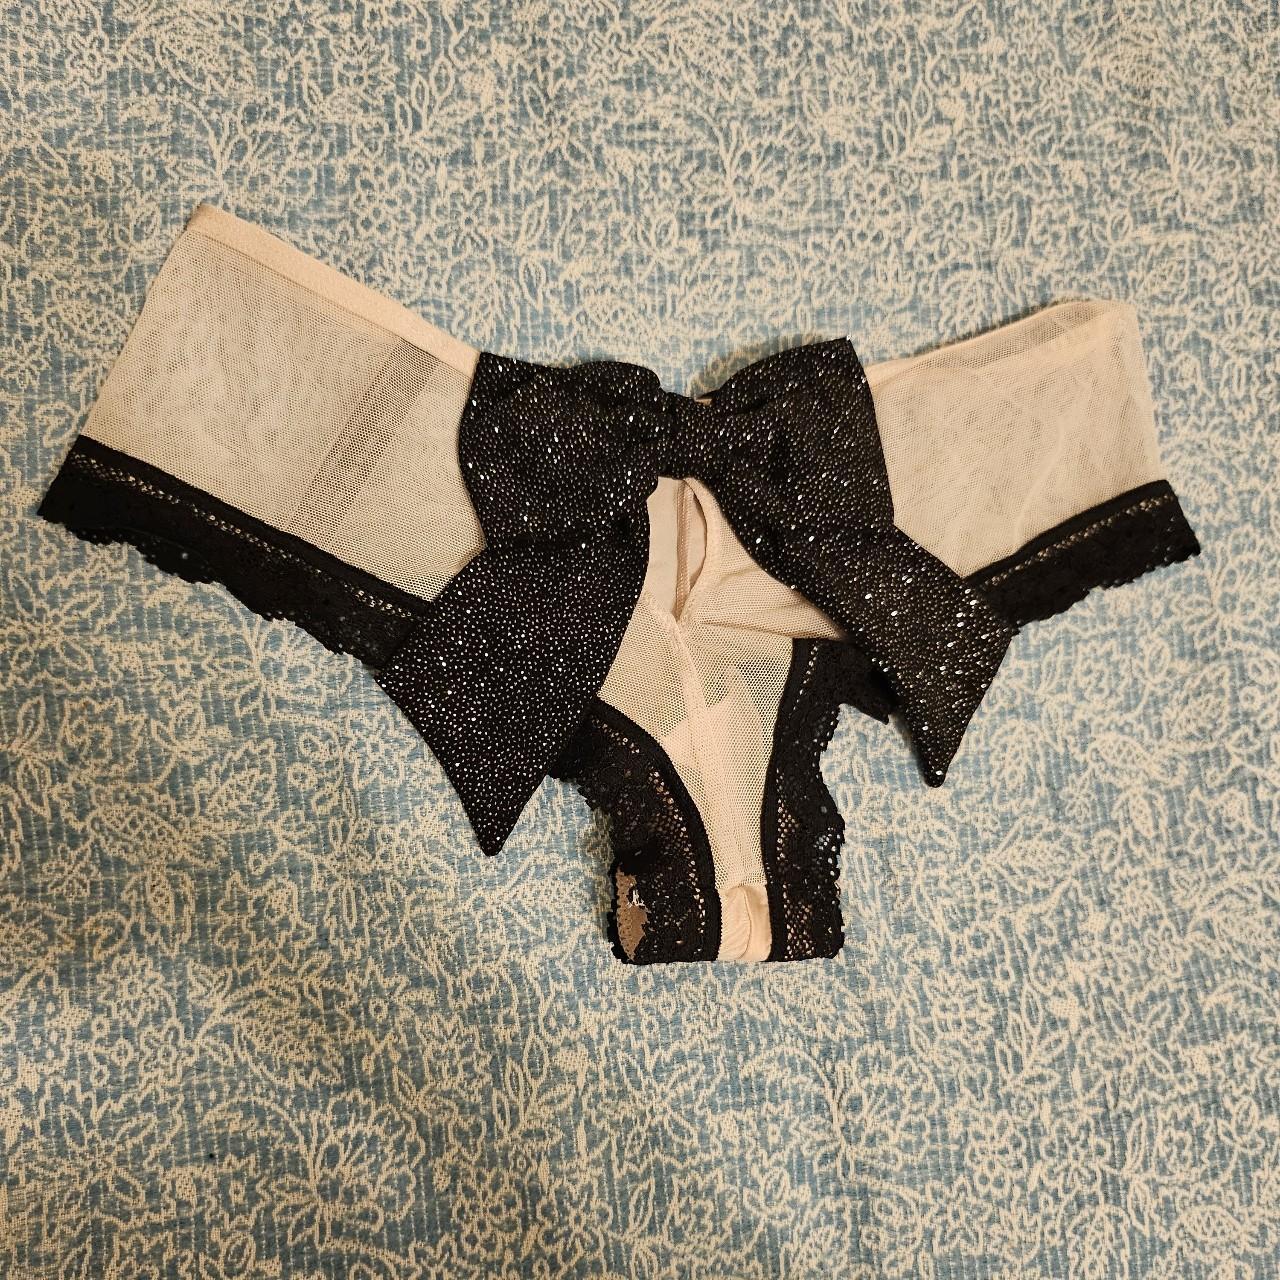 Buy Victoria's Secret 3 Womens Black Bow Cheeky Lace Panties Small